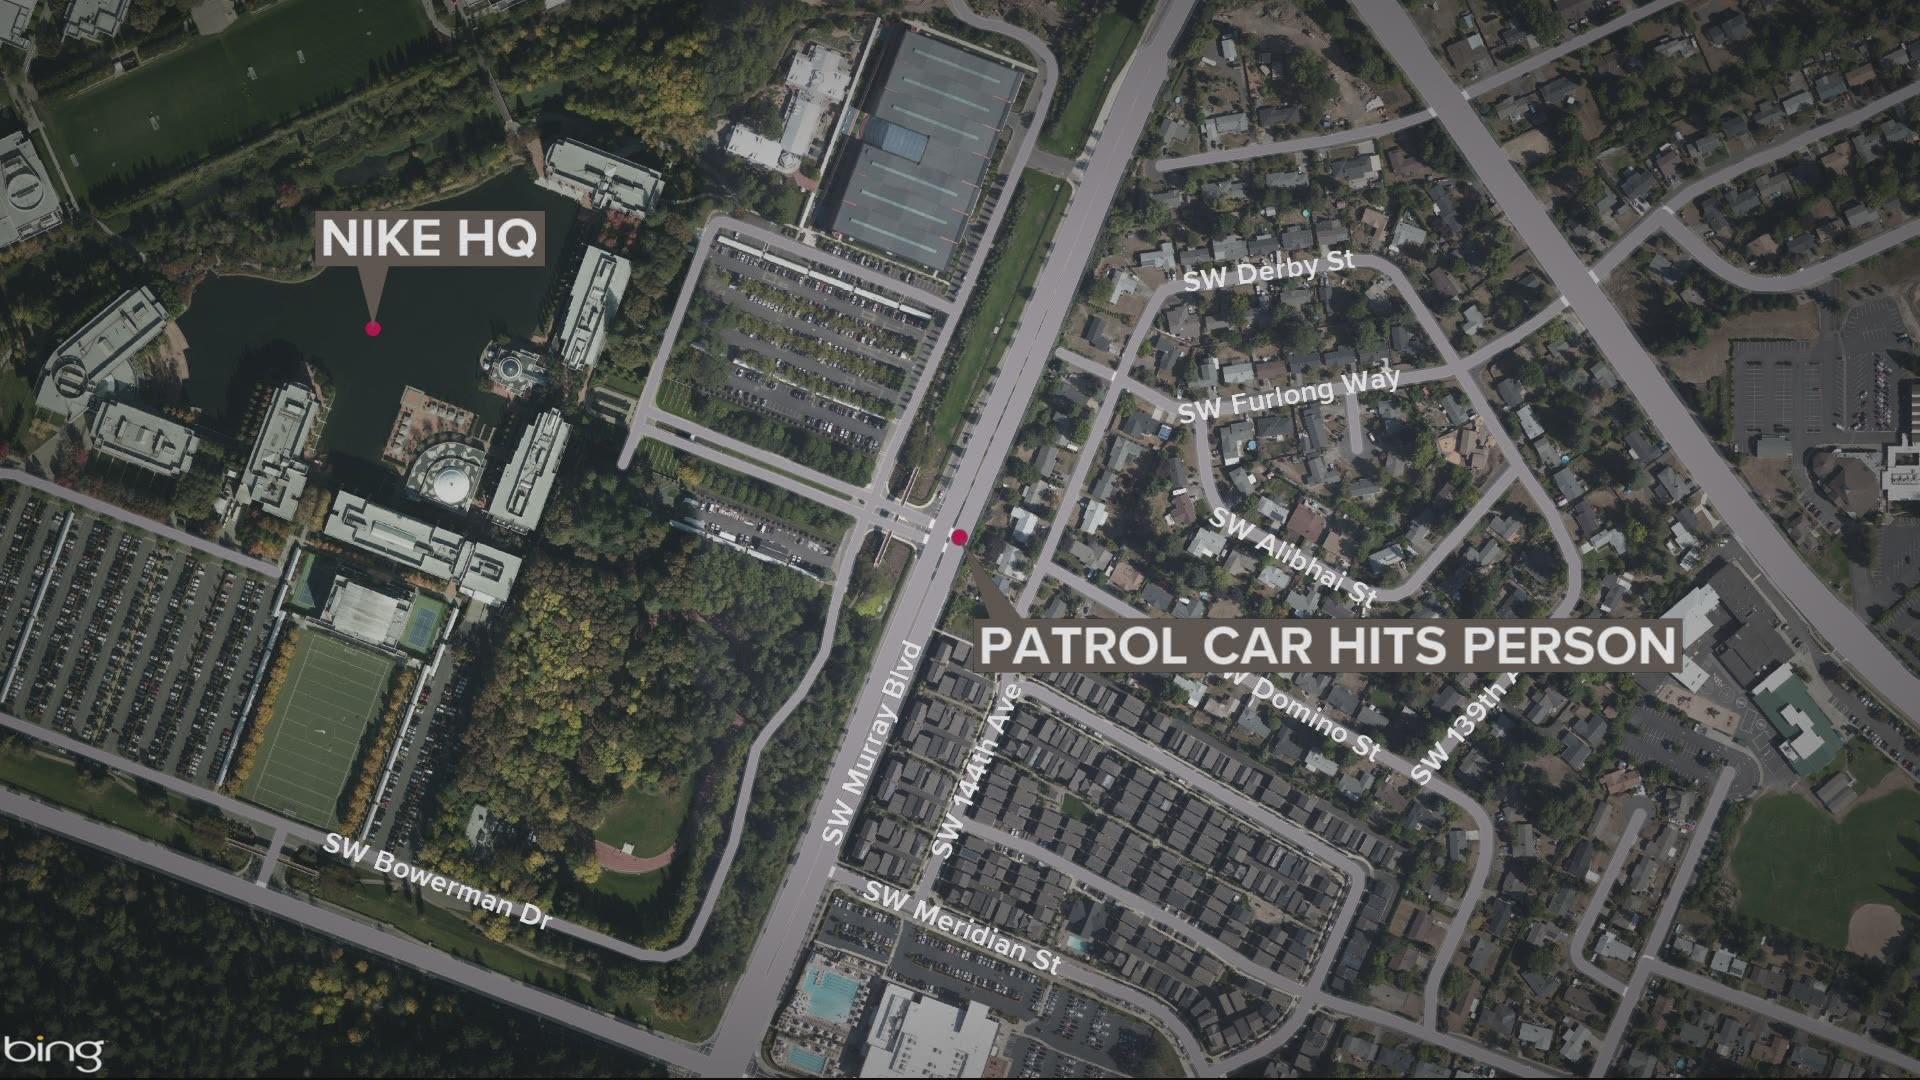 The crash happened shortly before 2 a.m. Thursday near the Nike World Headquarters campus in Beaverton.